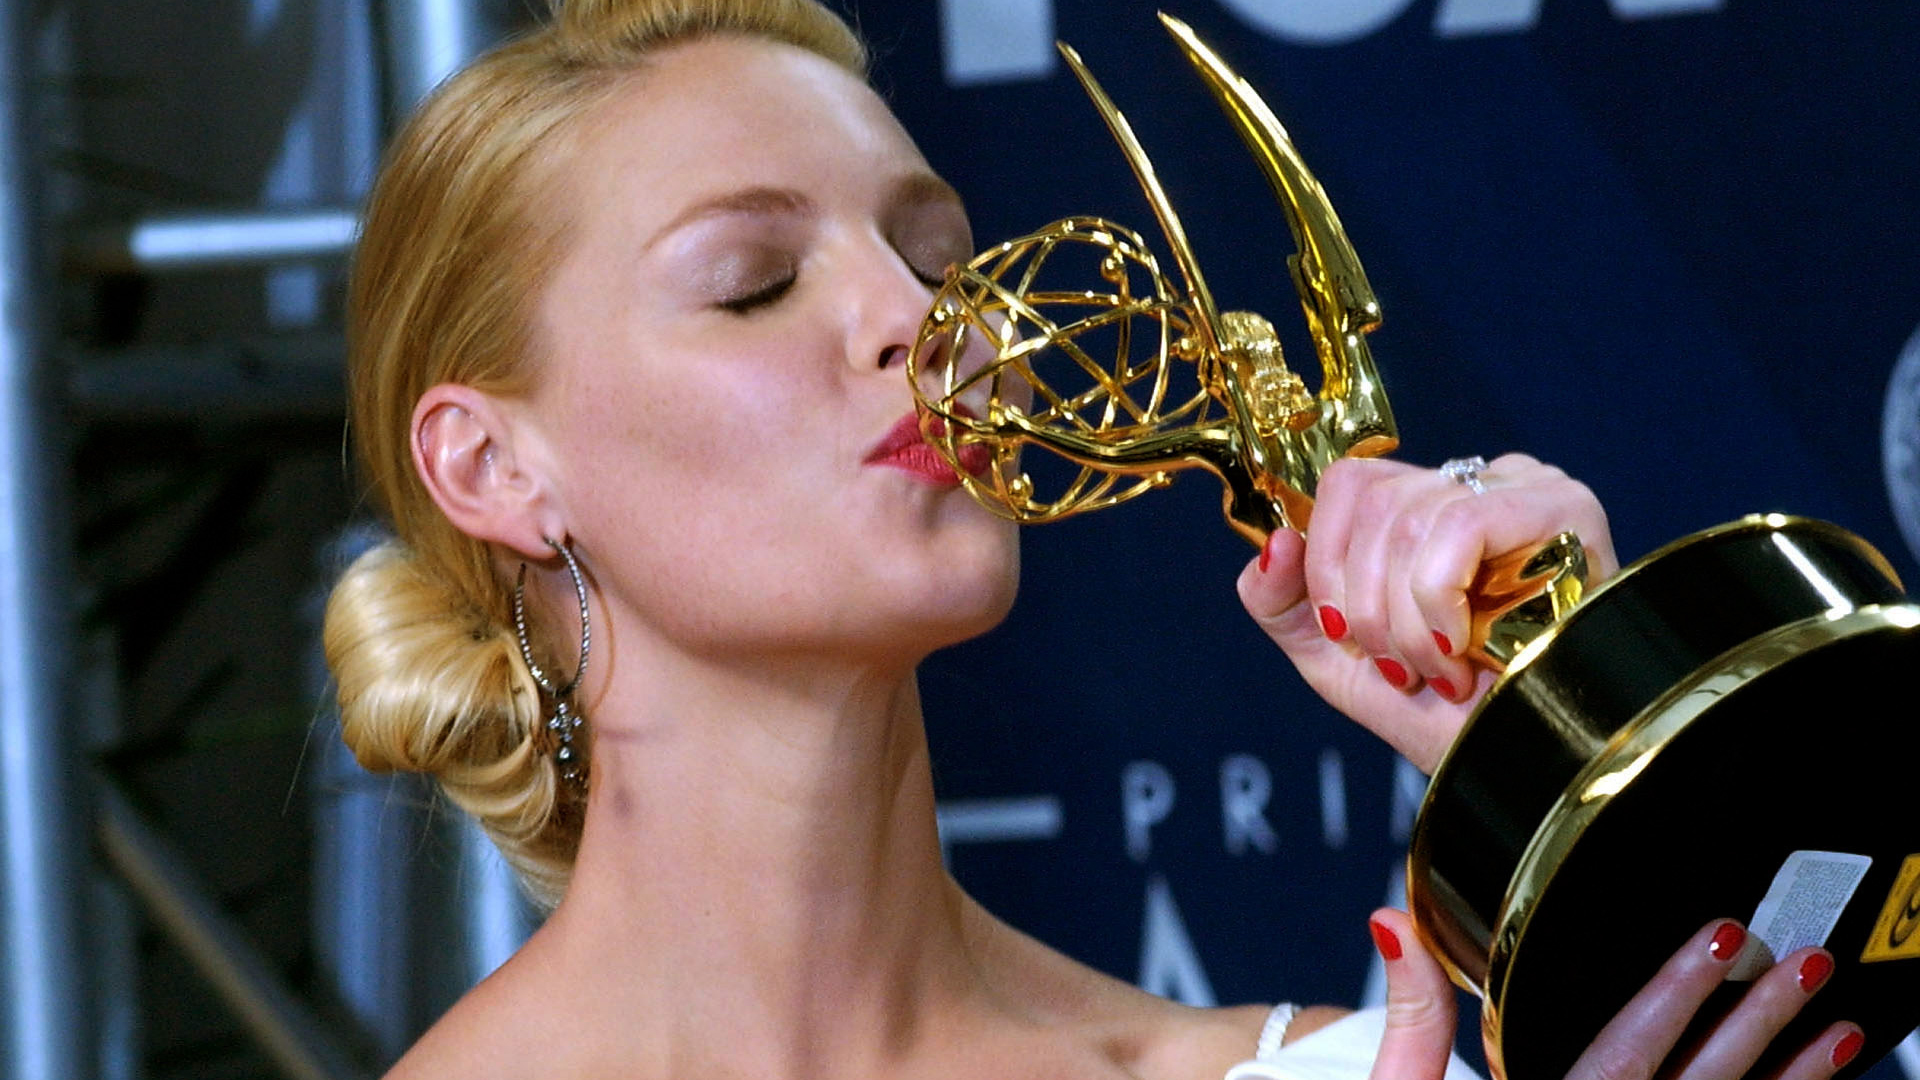 ‘Grey’s Anatomy’ star Katherine Heigl kissing her Emmy Award in the press room at the 59th Annual Primetime Emmy Awards for Outstanding Supporting Actress in a Drama Series in 2007